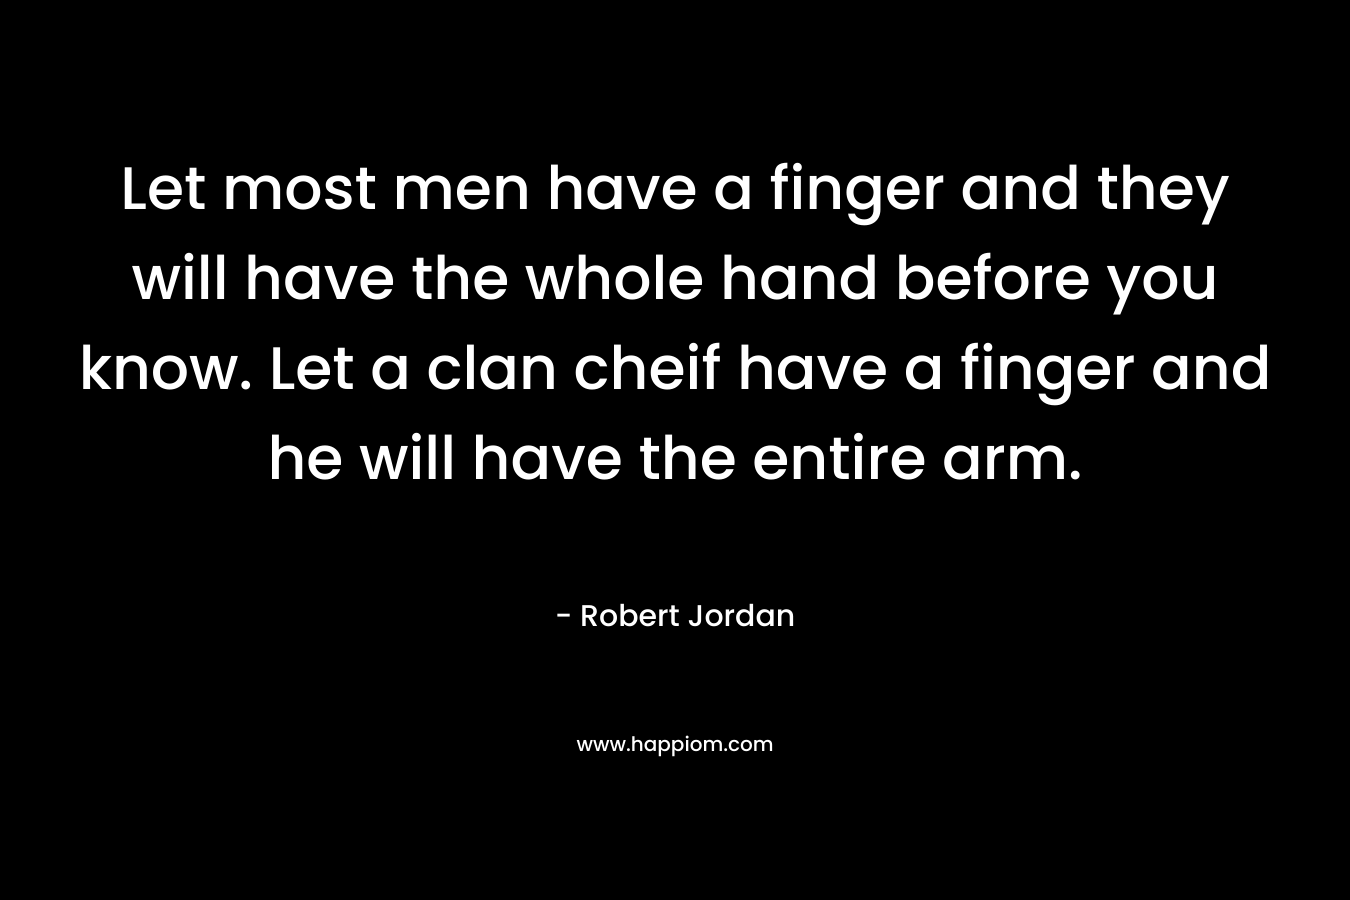 Let most men have a finger and they will have the whole hand before you know. Let a clan cheif have a finger and he will have the entire arm. – Robert Jordan